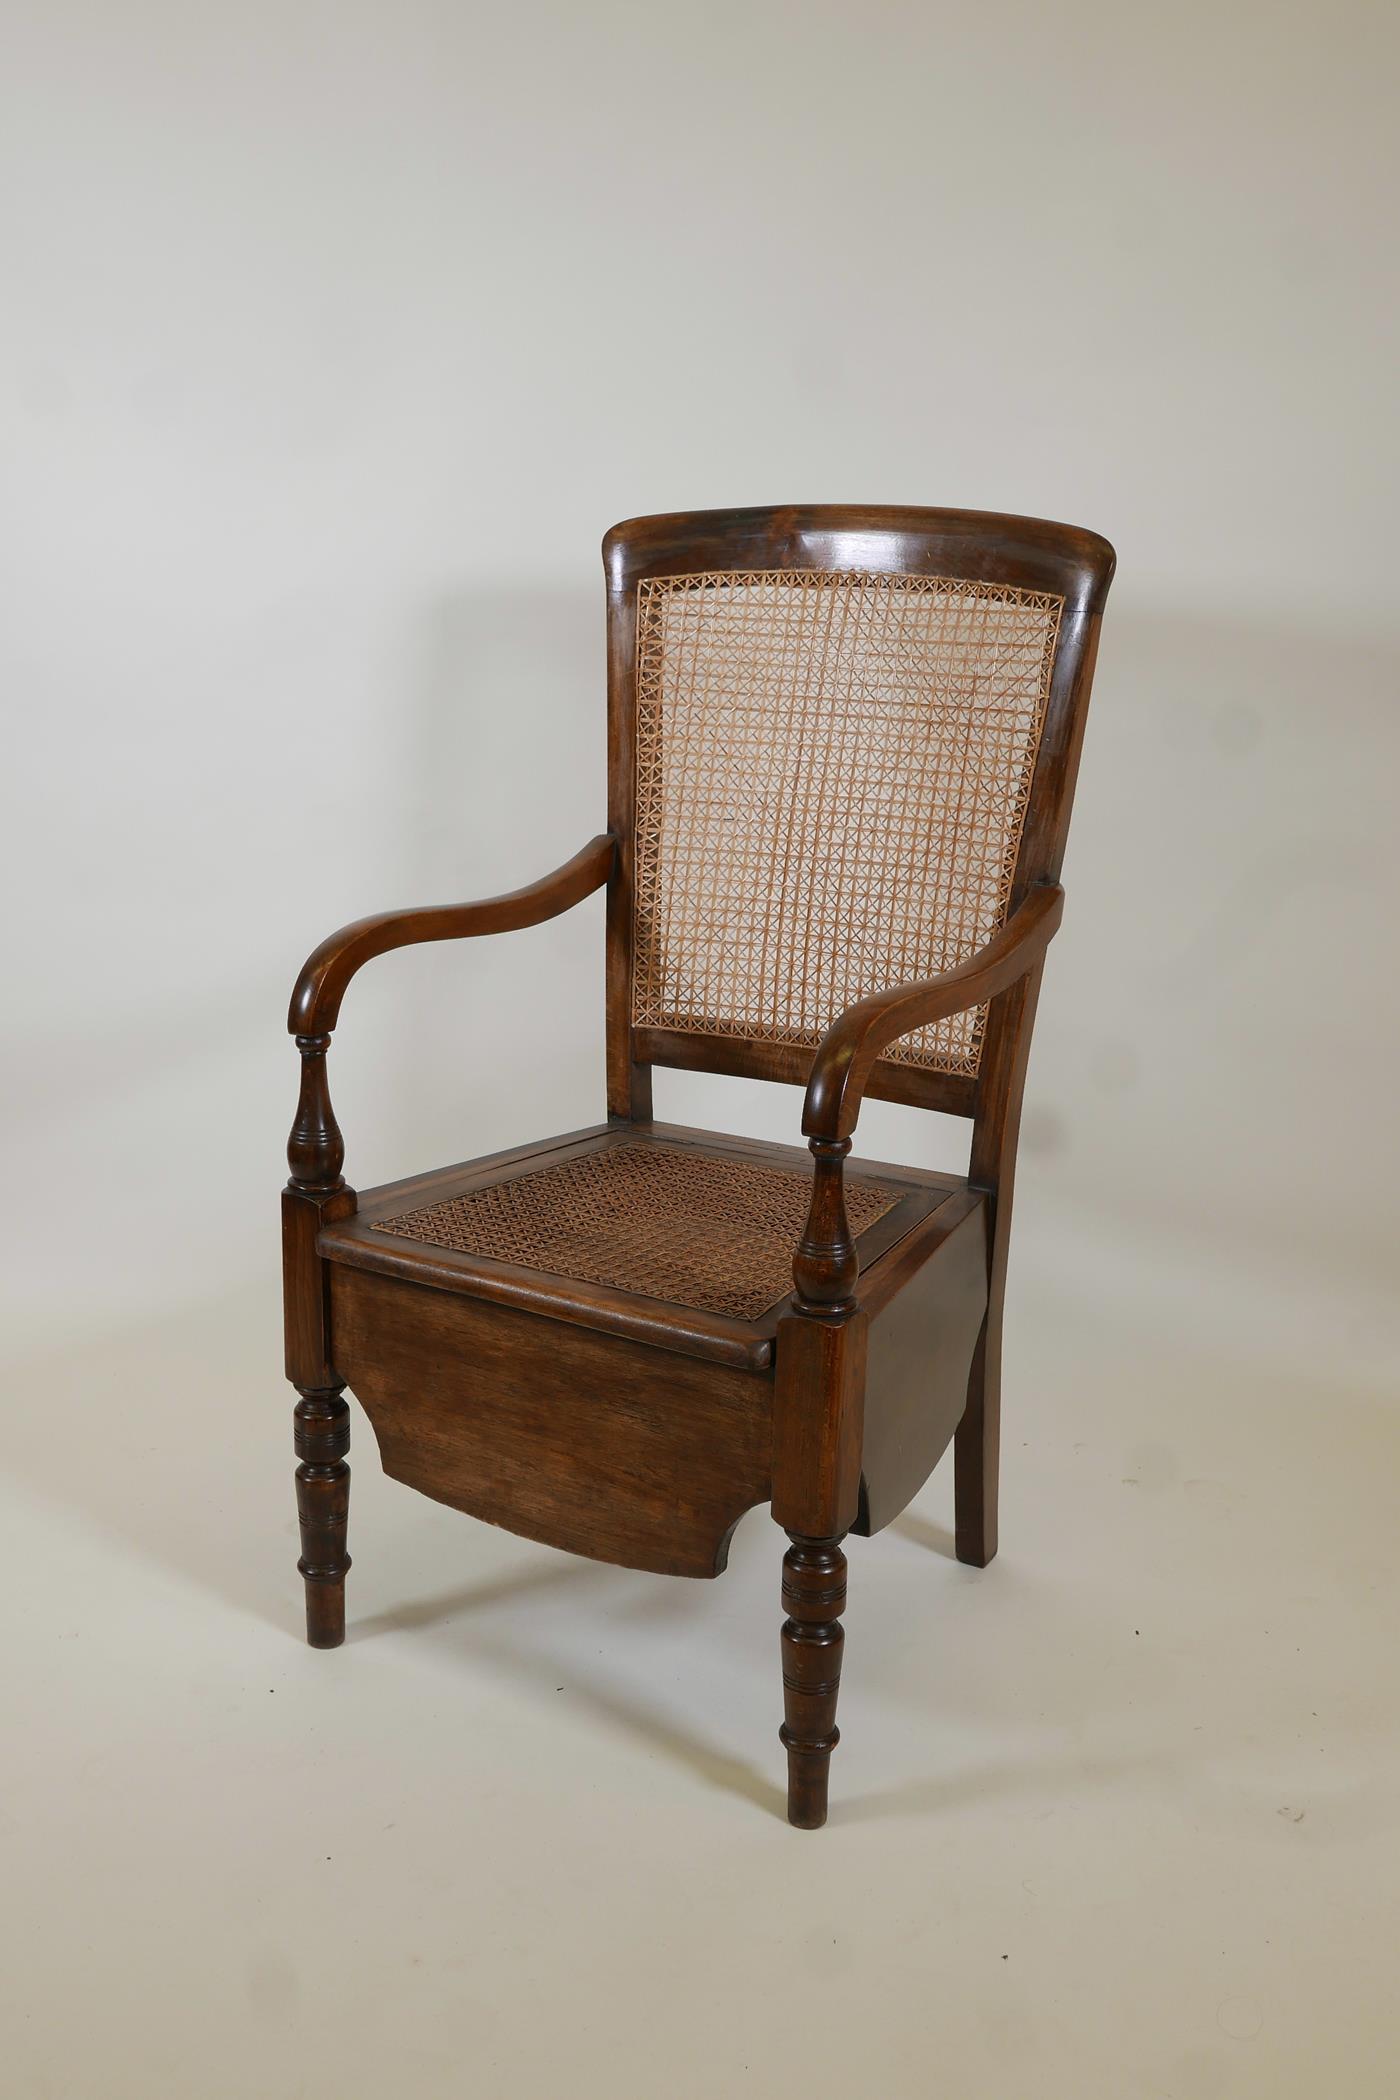 A beech framed commode armchair with bergere panel back by Carter's Ltd, 39" high